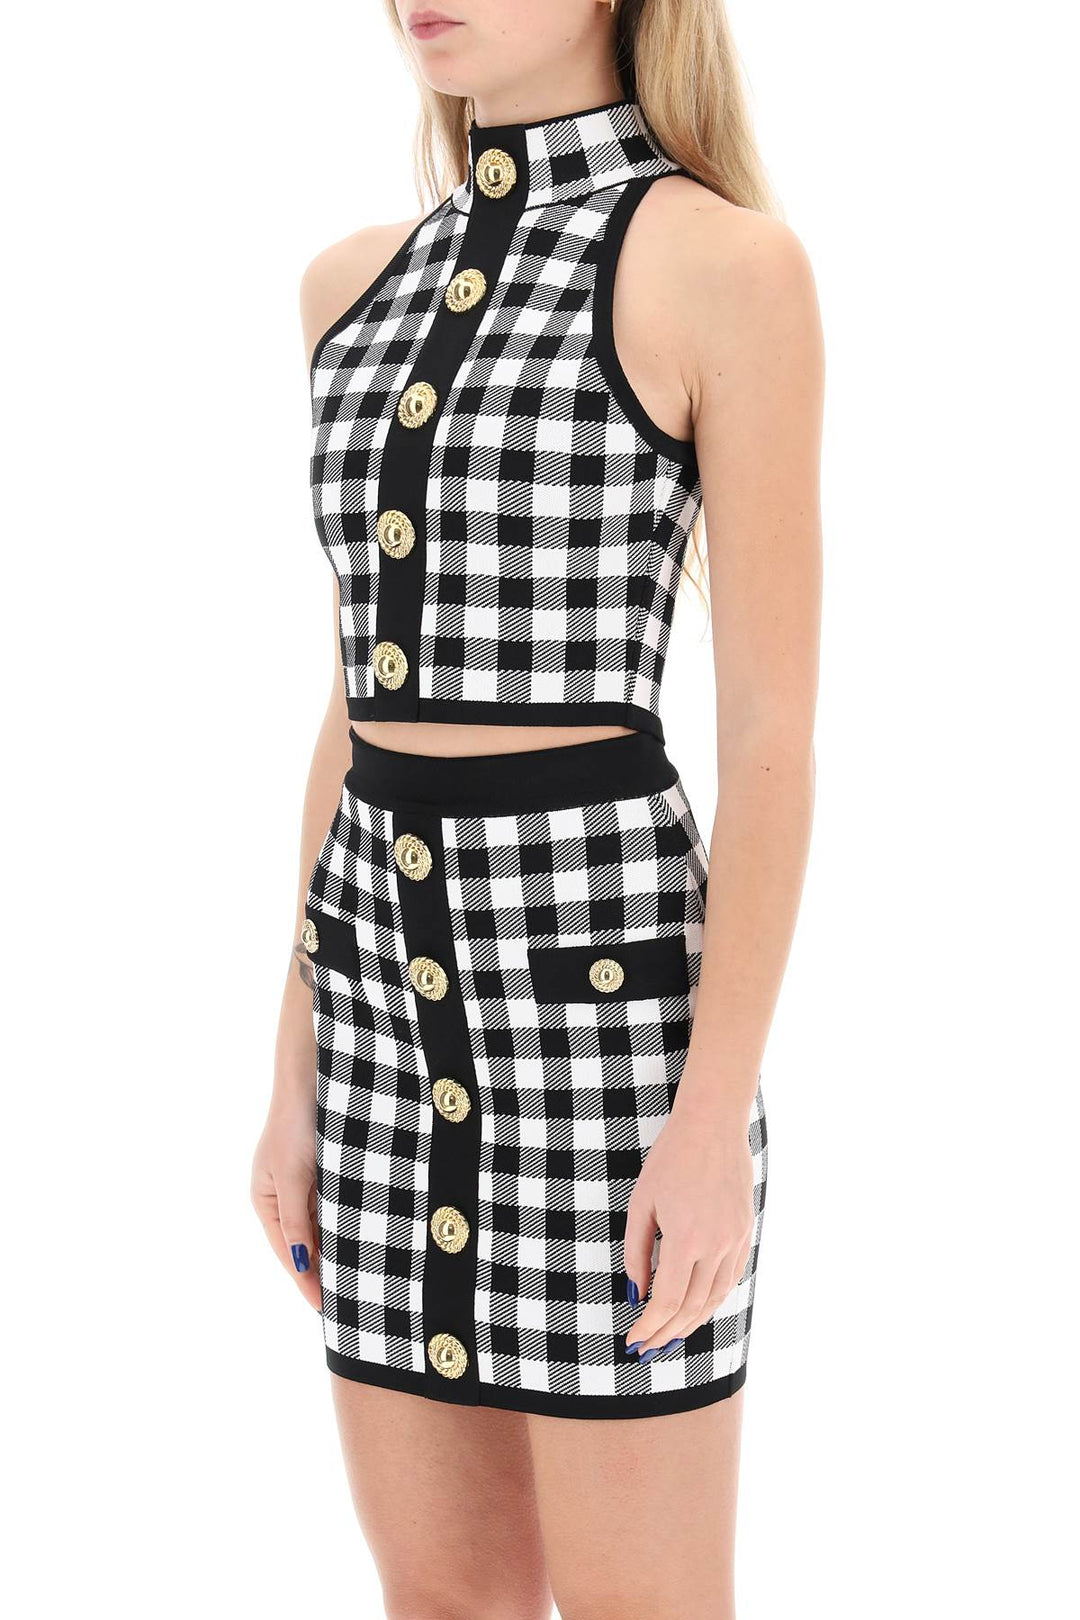 Balmain Gingham Knit Cropped Top With Embossed Buttons   White